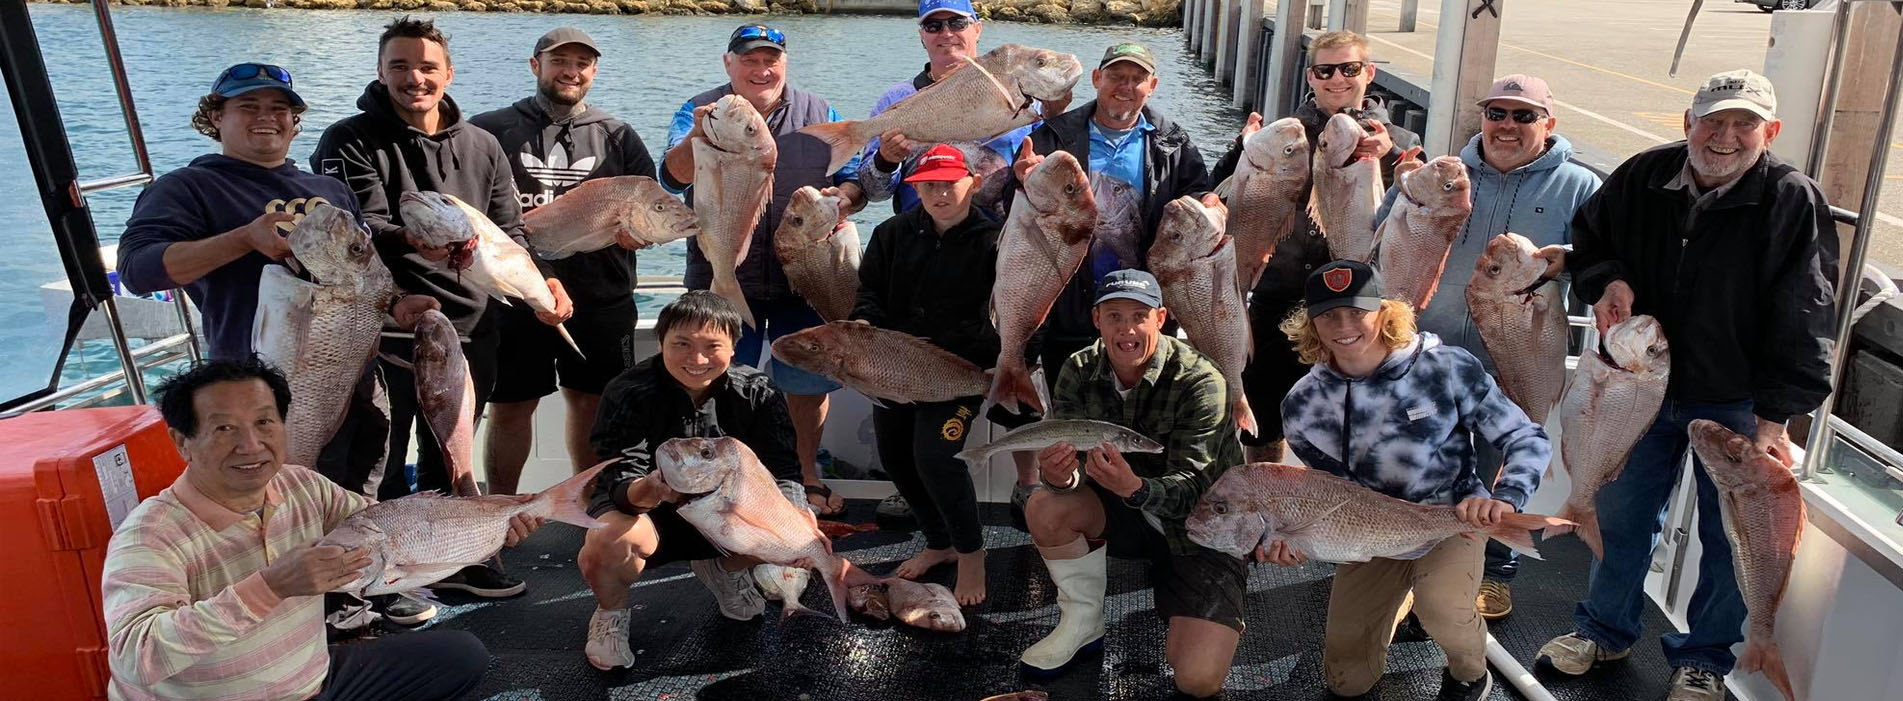 JAZZ IV fishing group with fish on deck